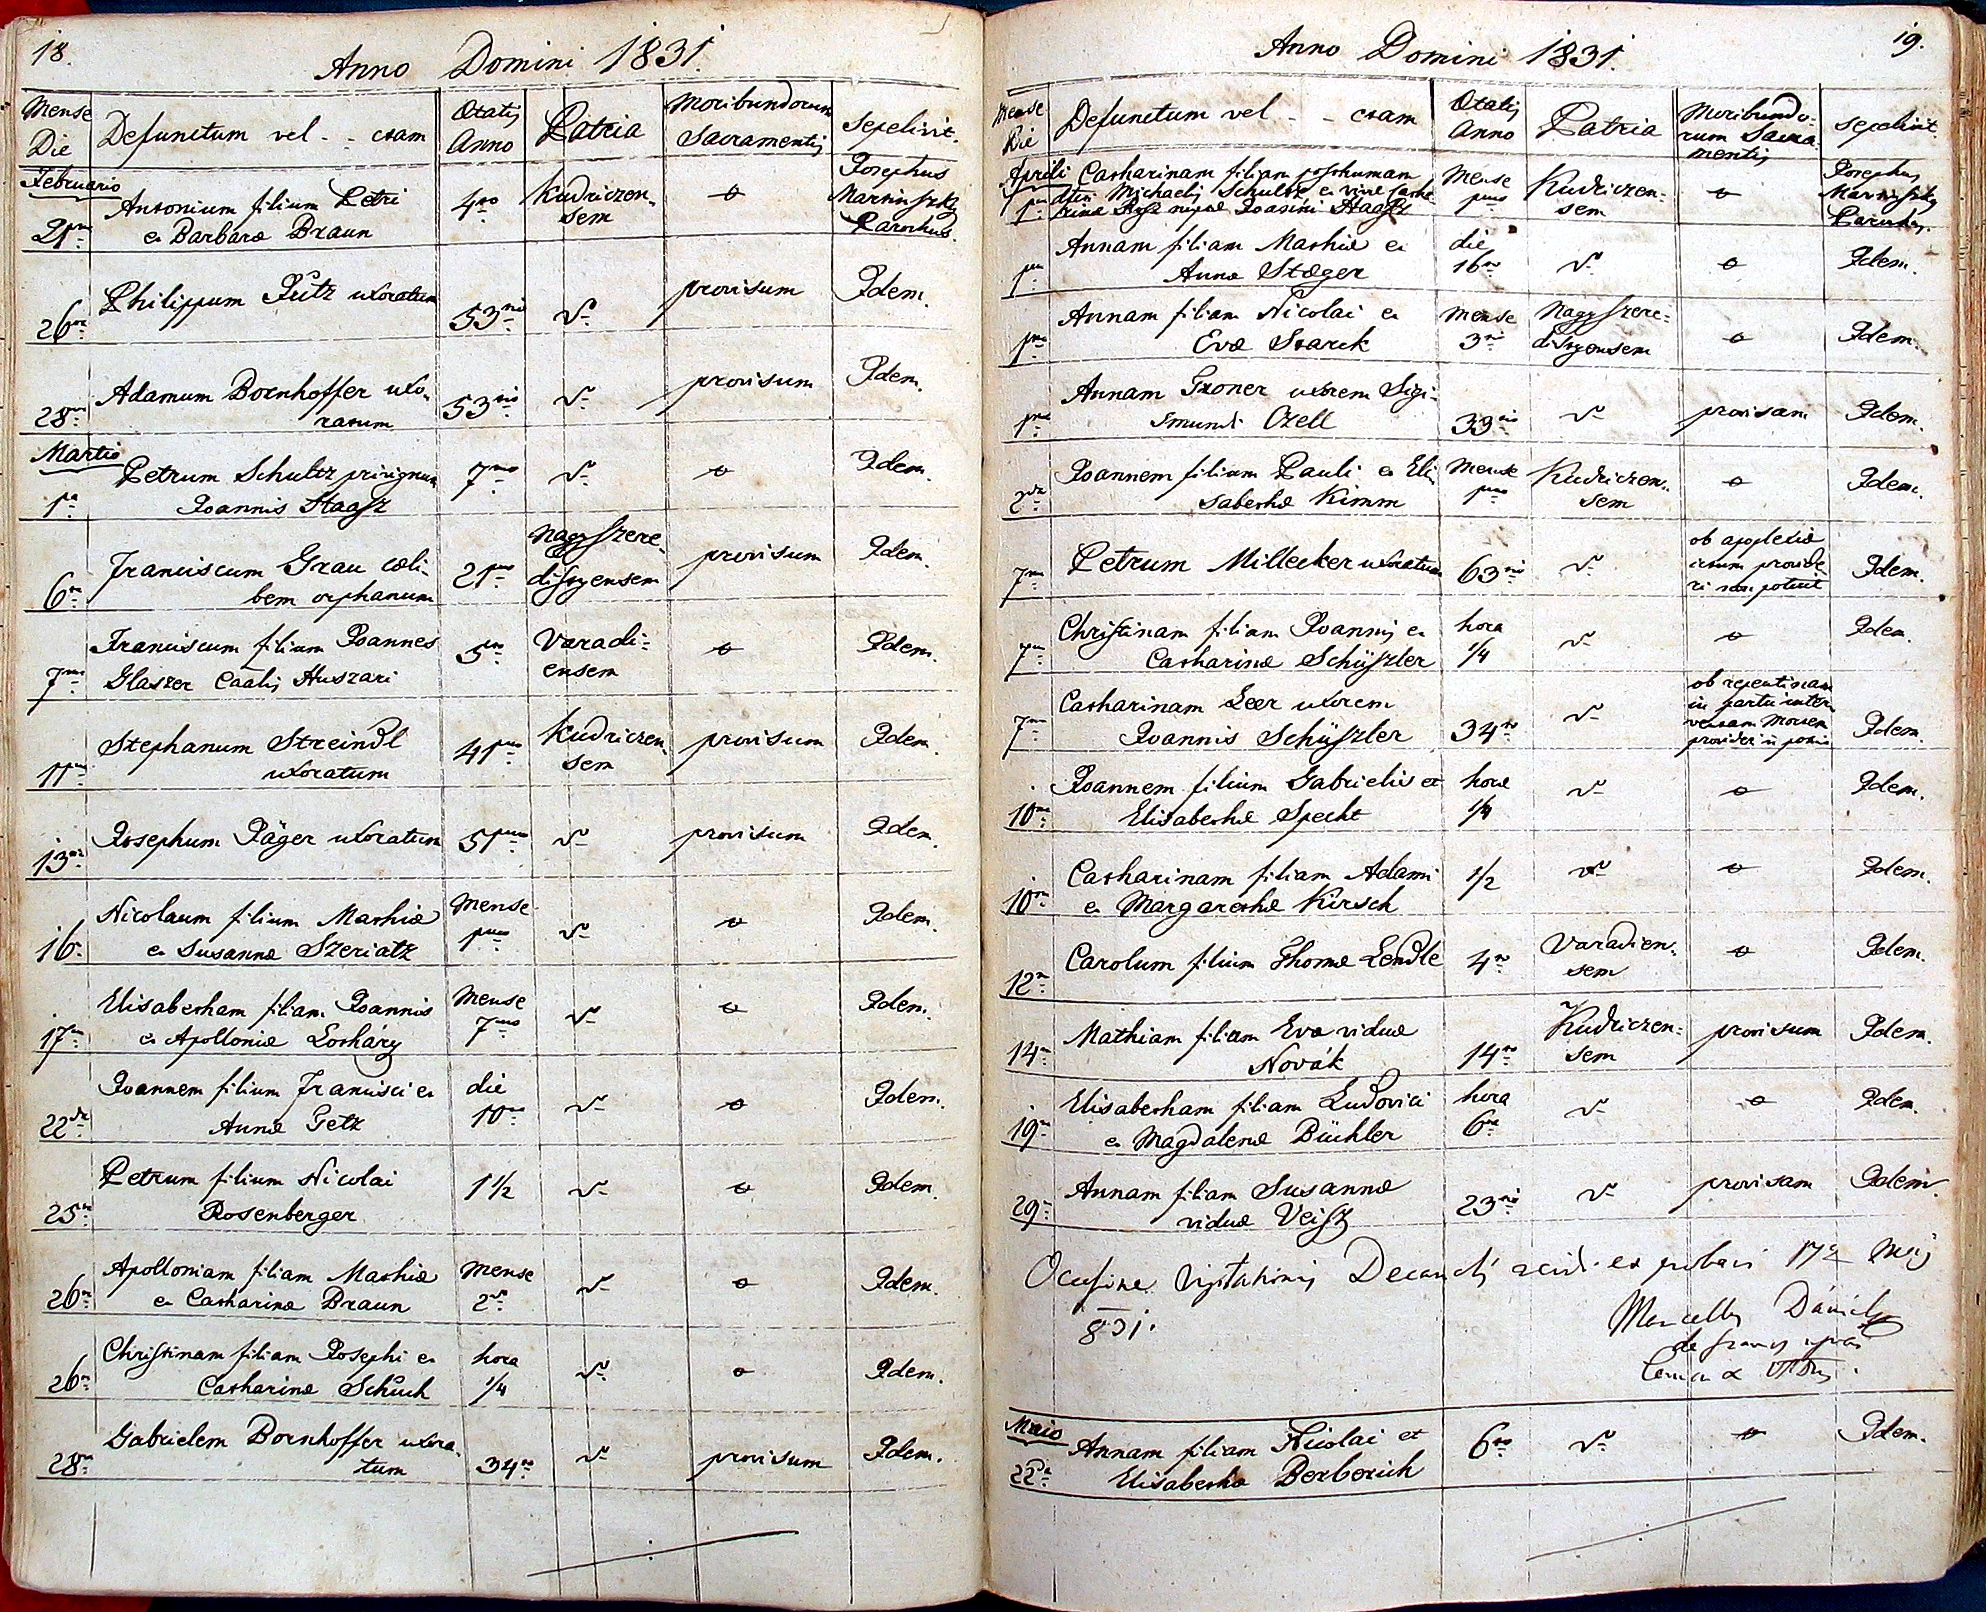 images/church_records/DEATHS/1775-1828D/018 i 019